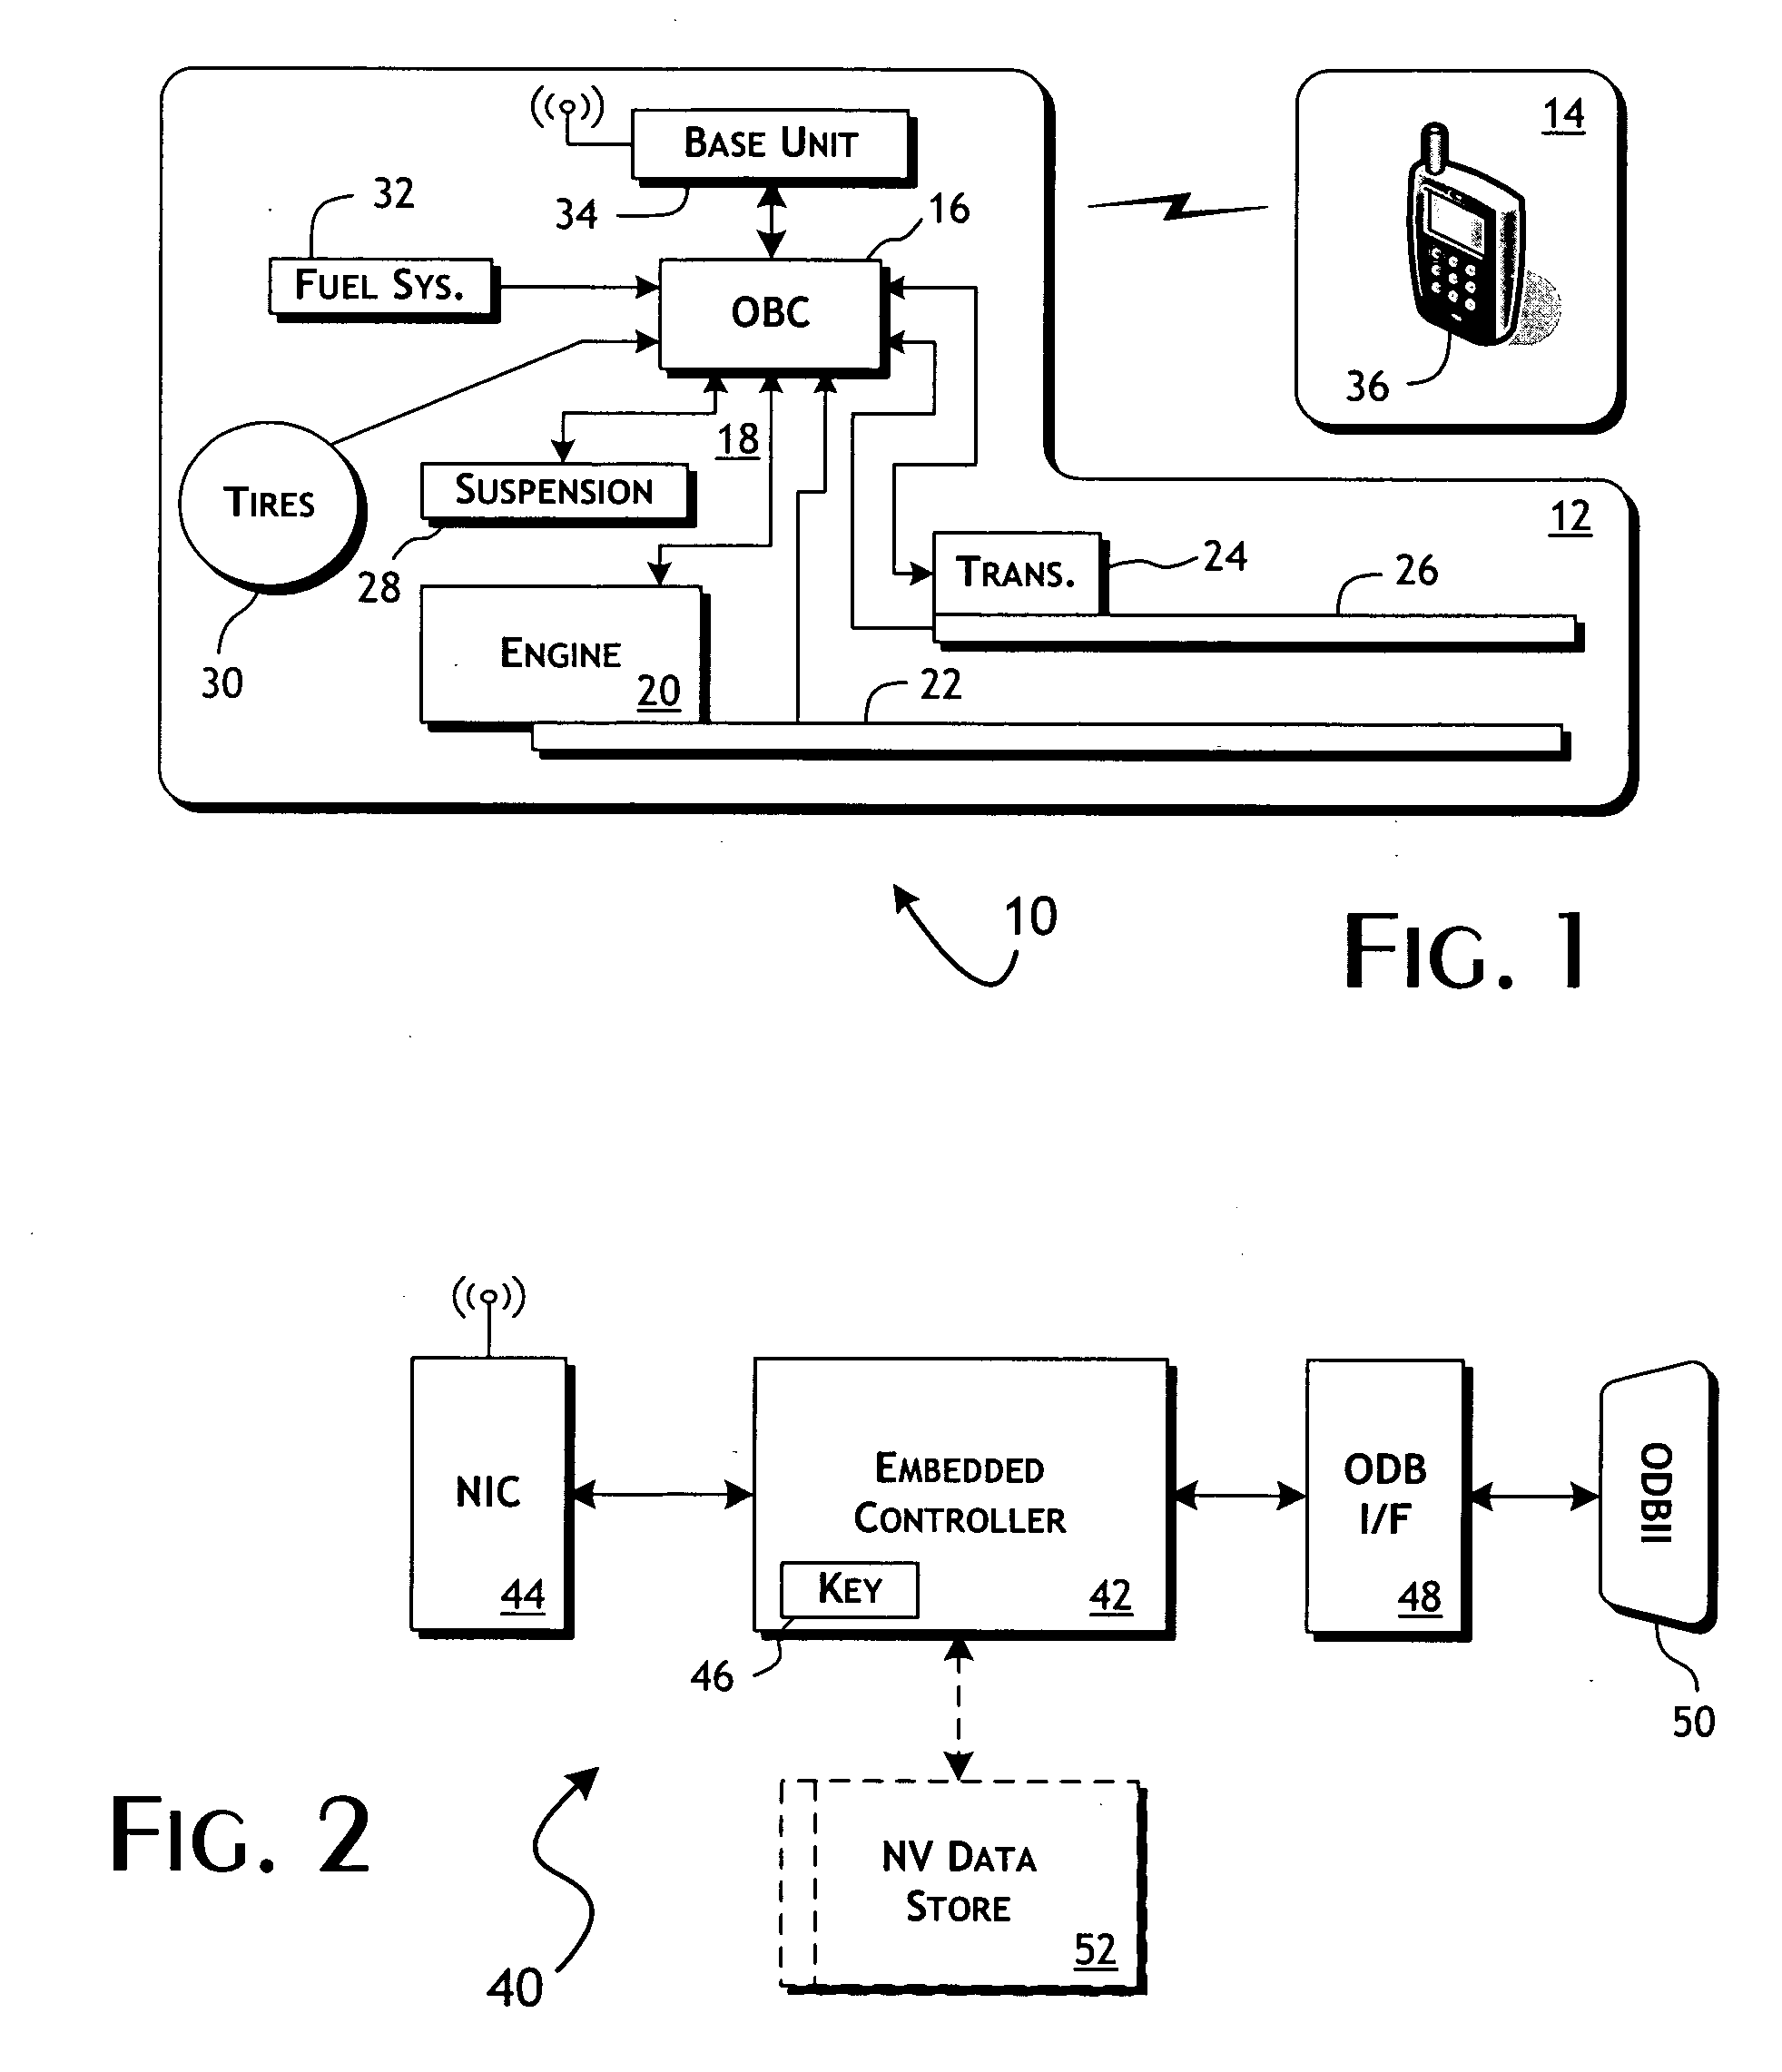 System and methods of performing real-time on-board automotive telemetry analysis and reporting